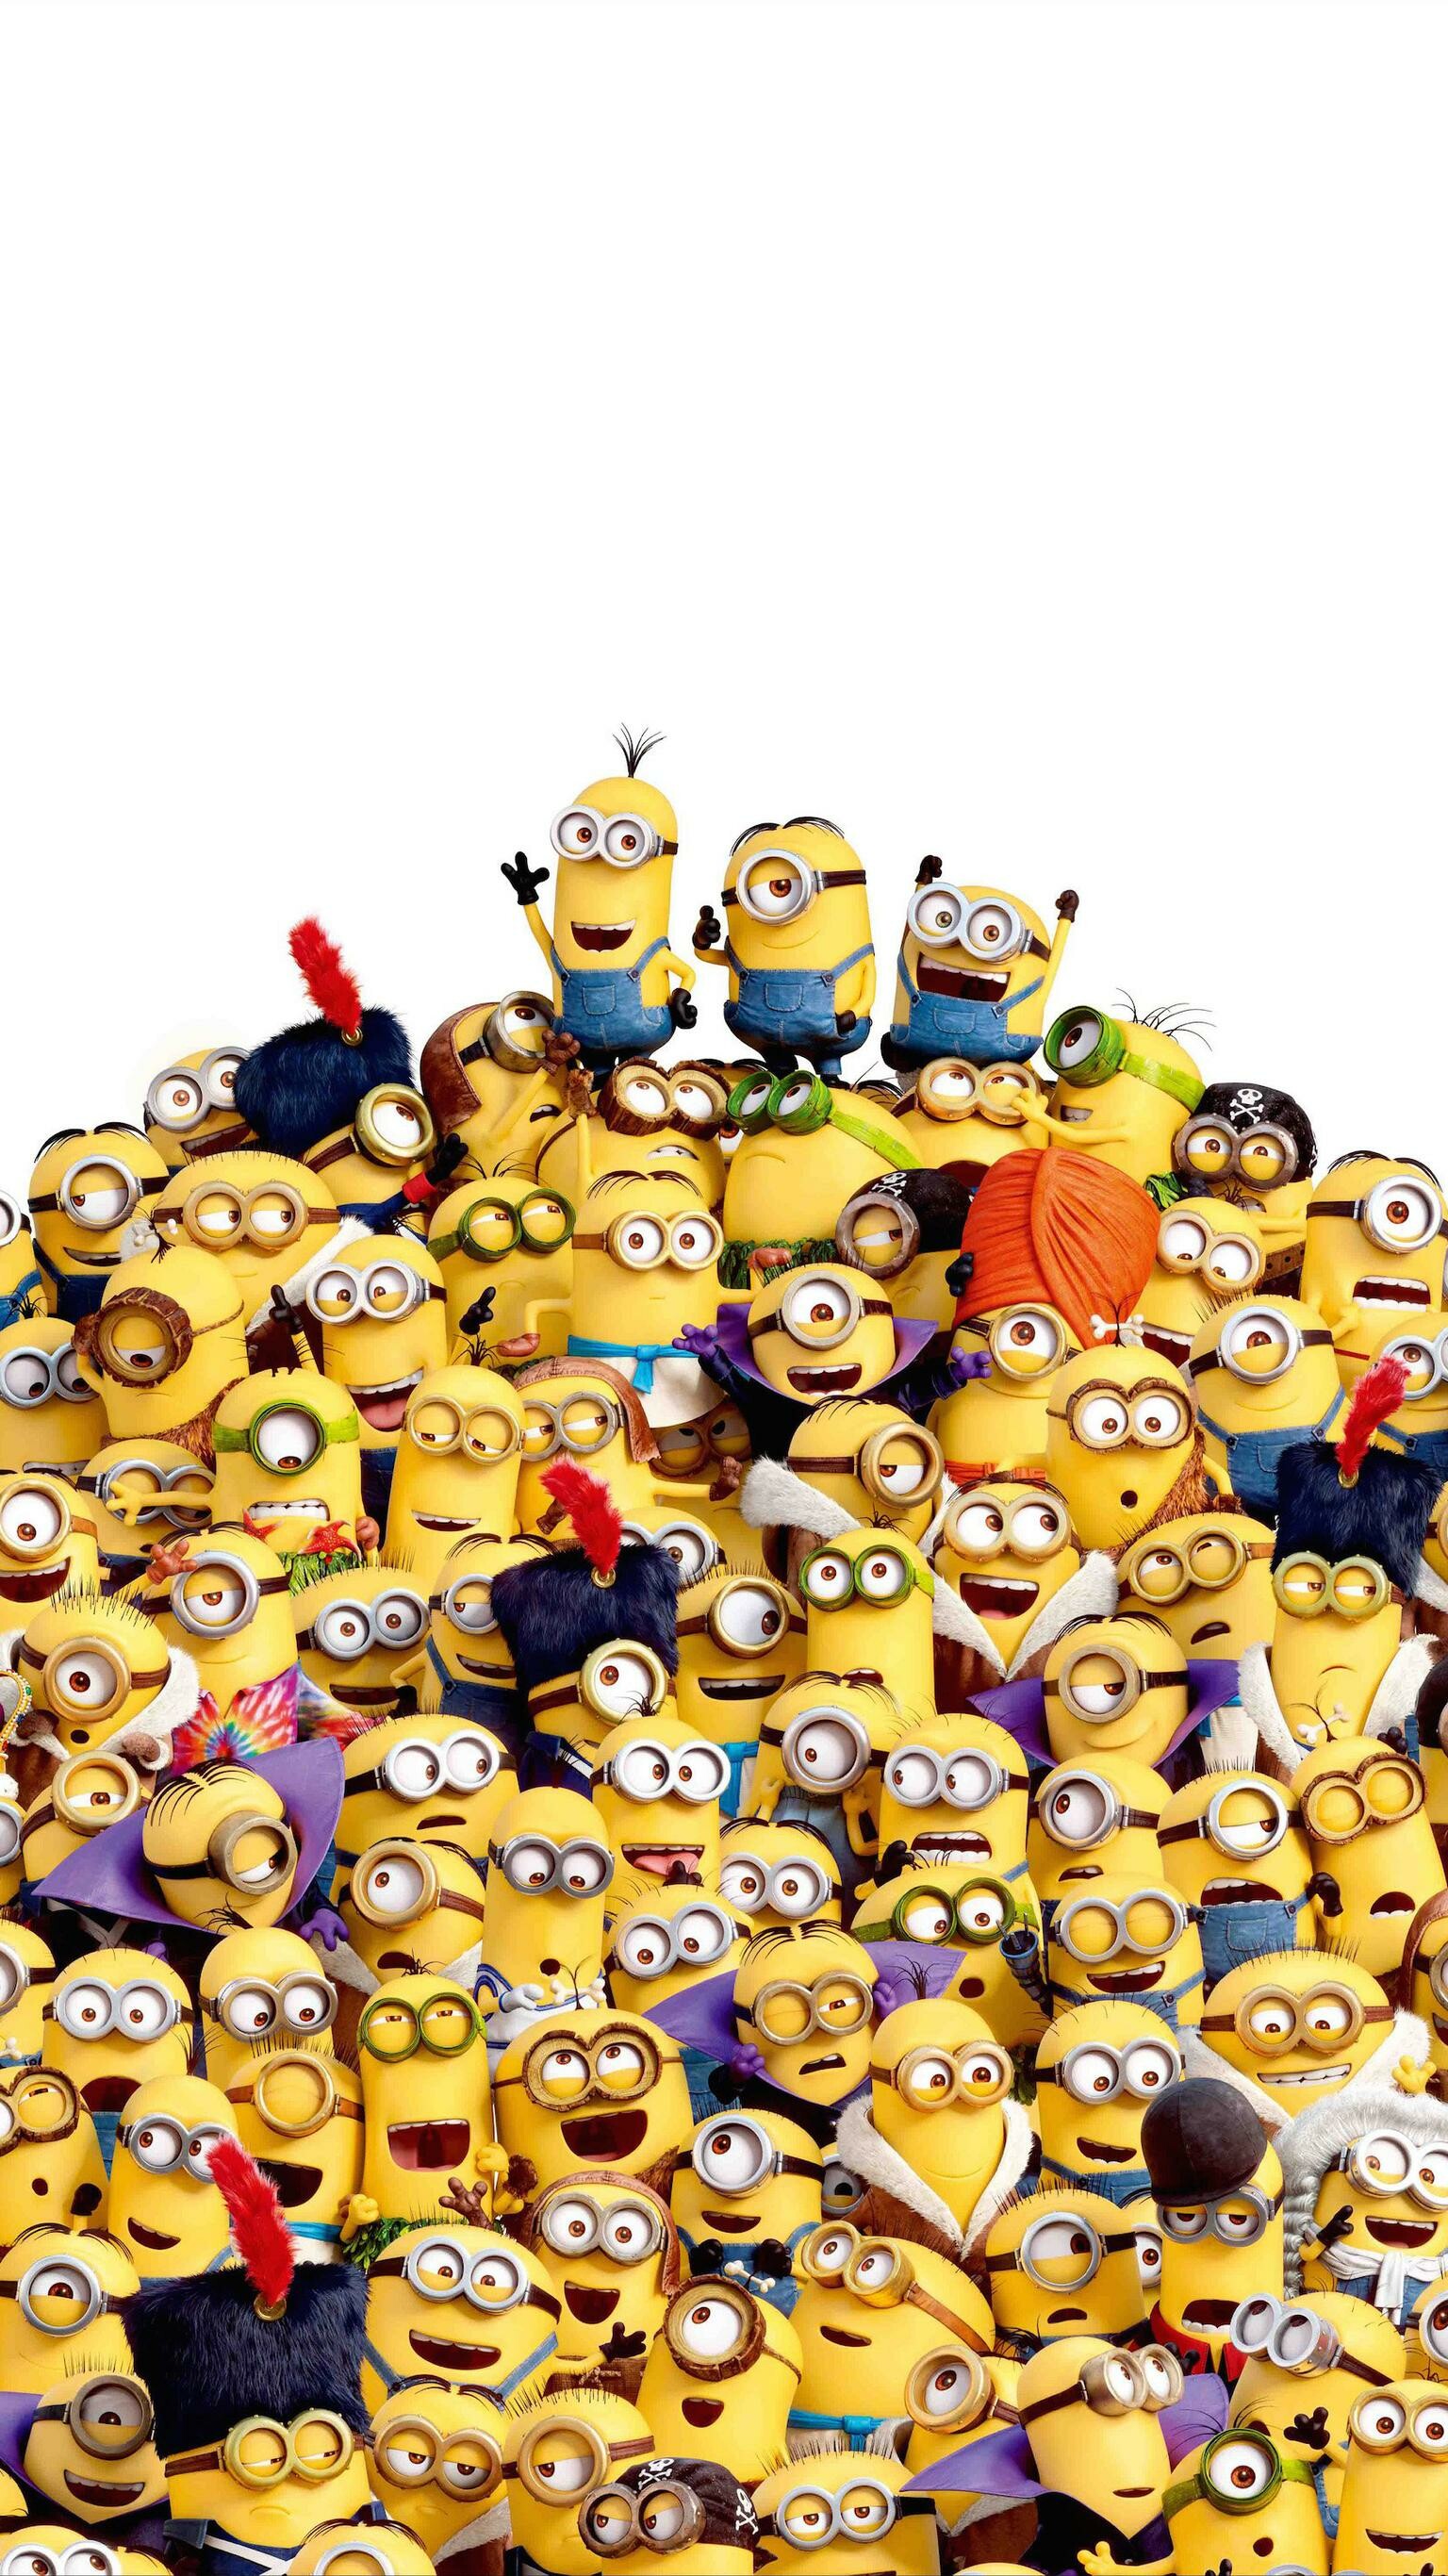 Despicable Me: Minions, a rambunctious bunch of simple-minded homunculi. 1540x2740 HD Wallpaper.